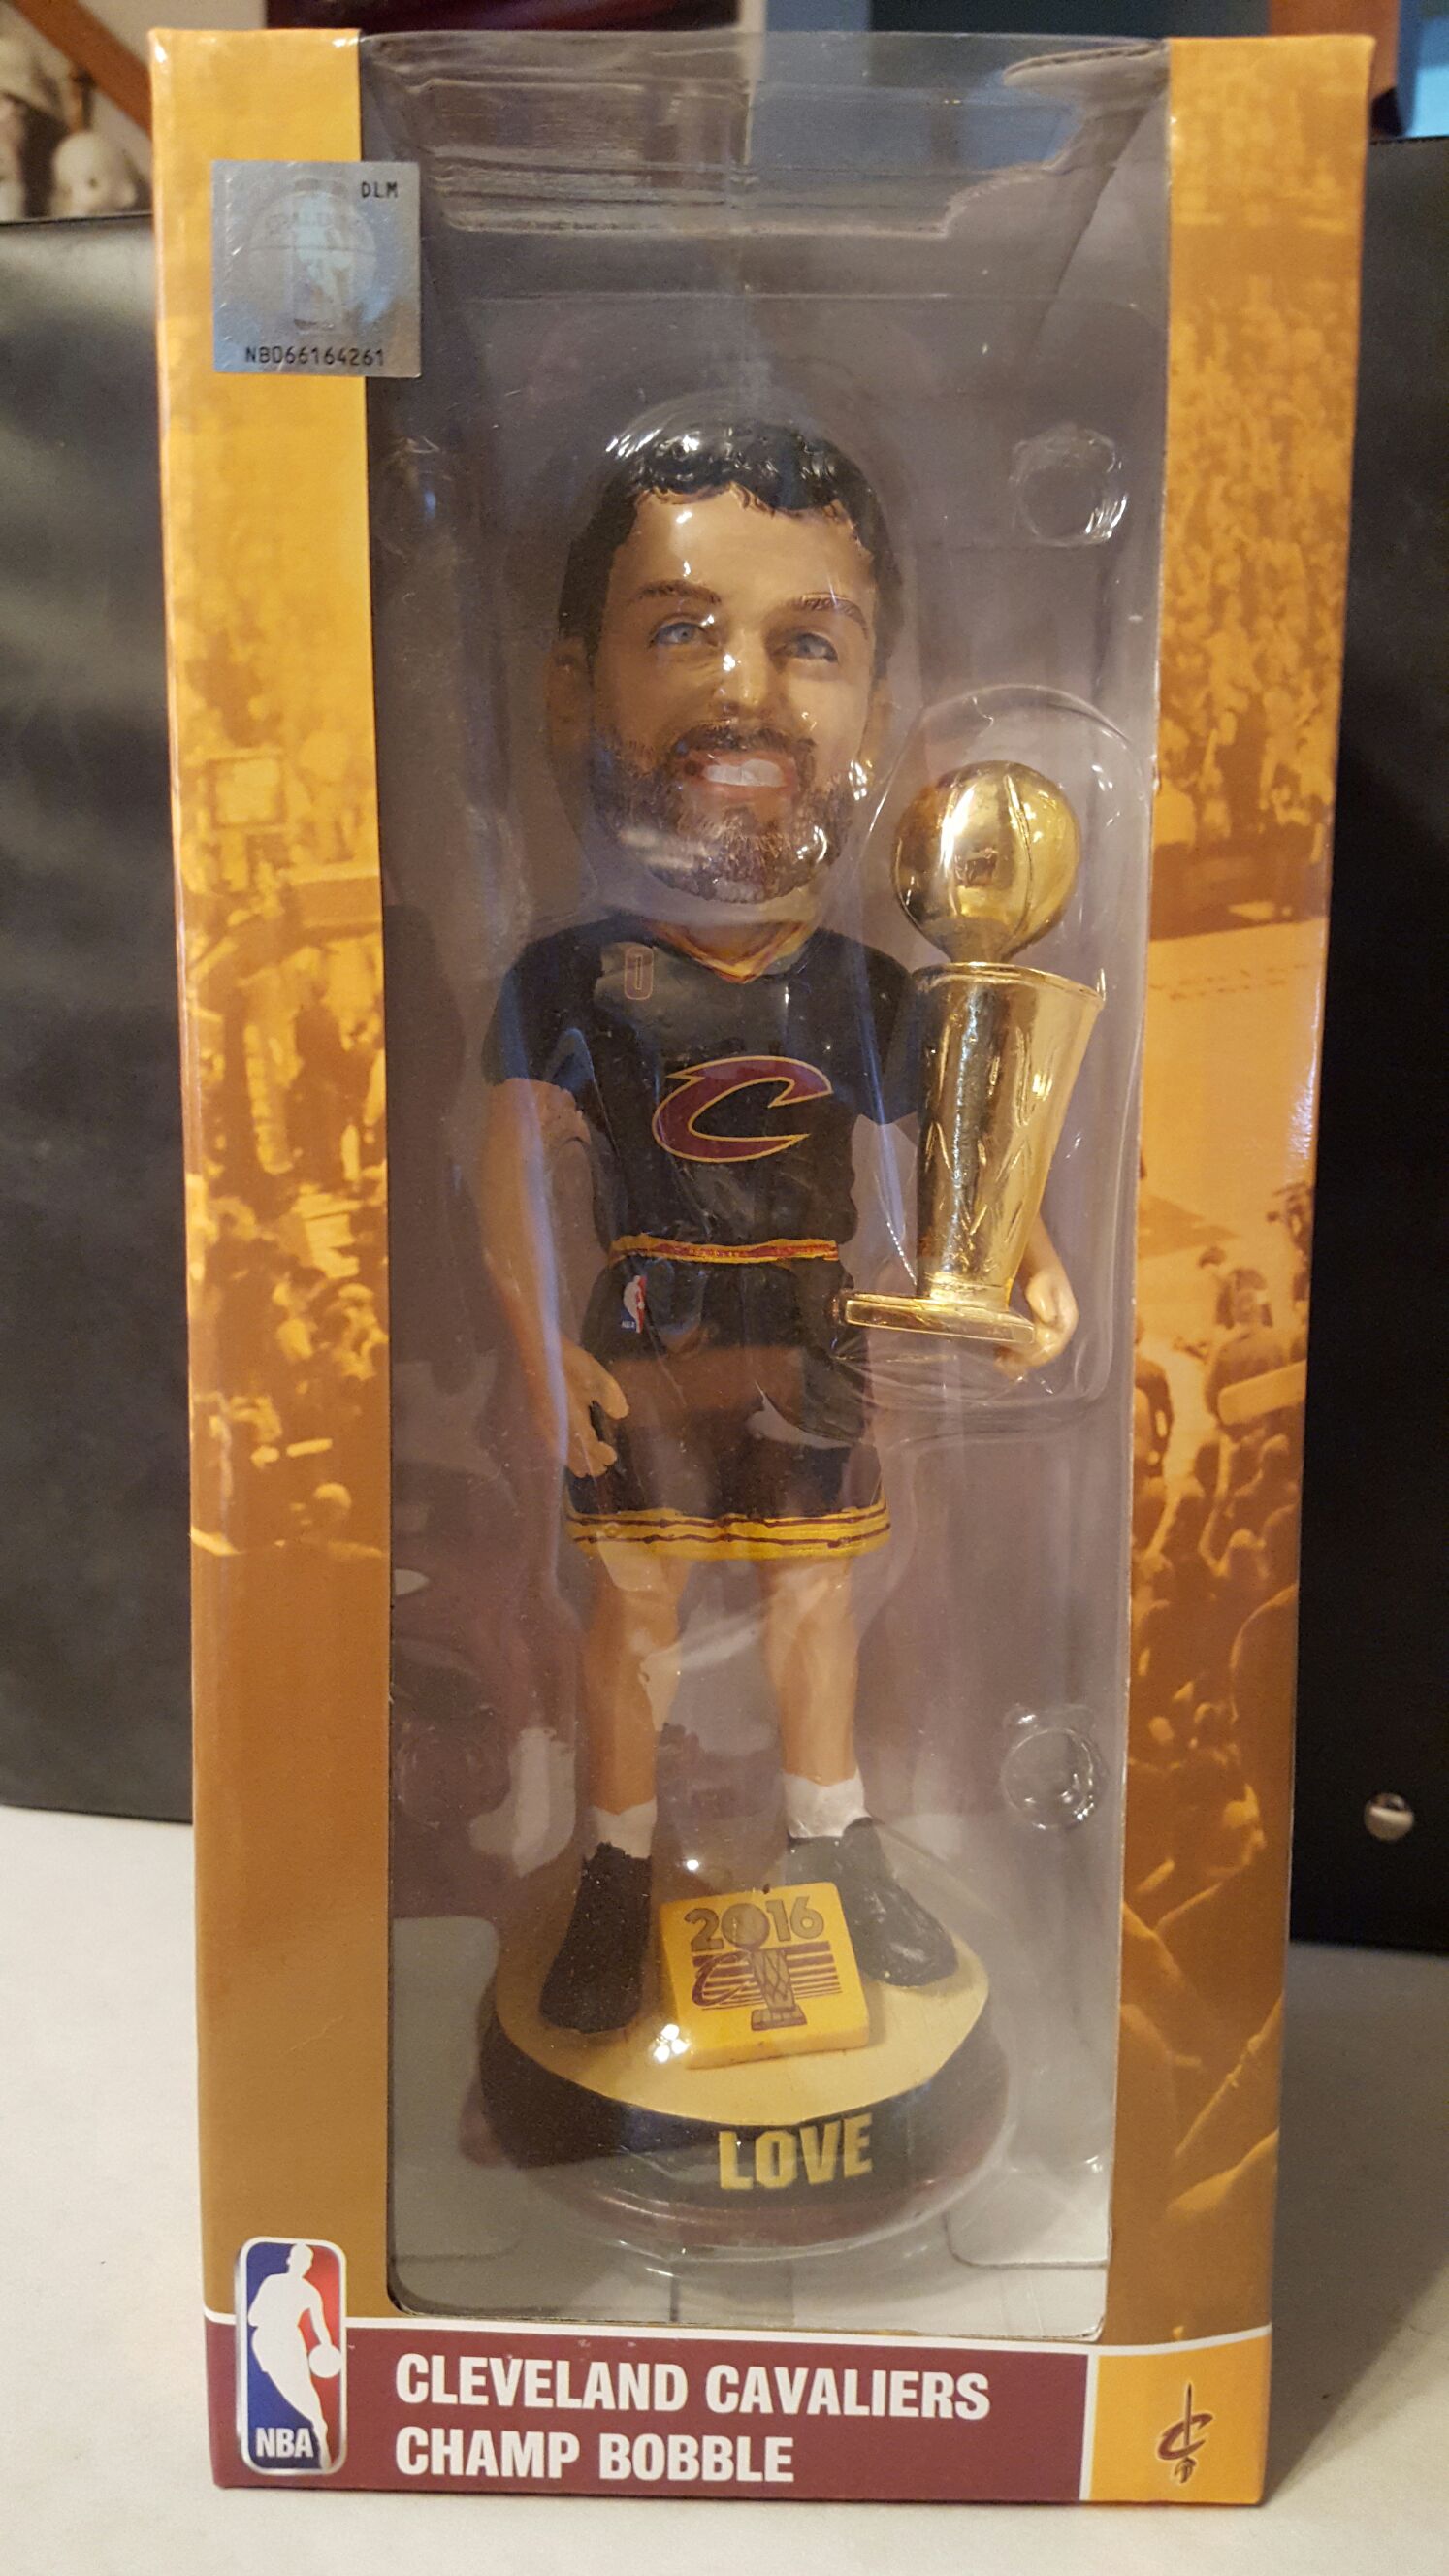 Cavs 2016 giant eagle Kevin Love  bobblehead collectible [Barcode 190163858775] - Main Image 2